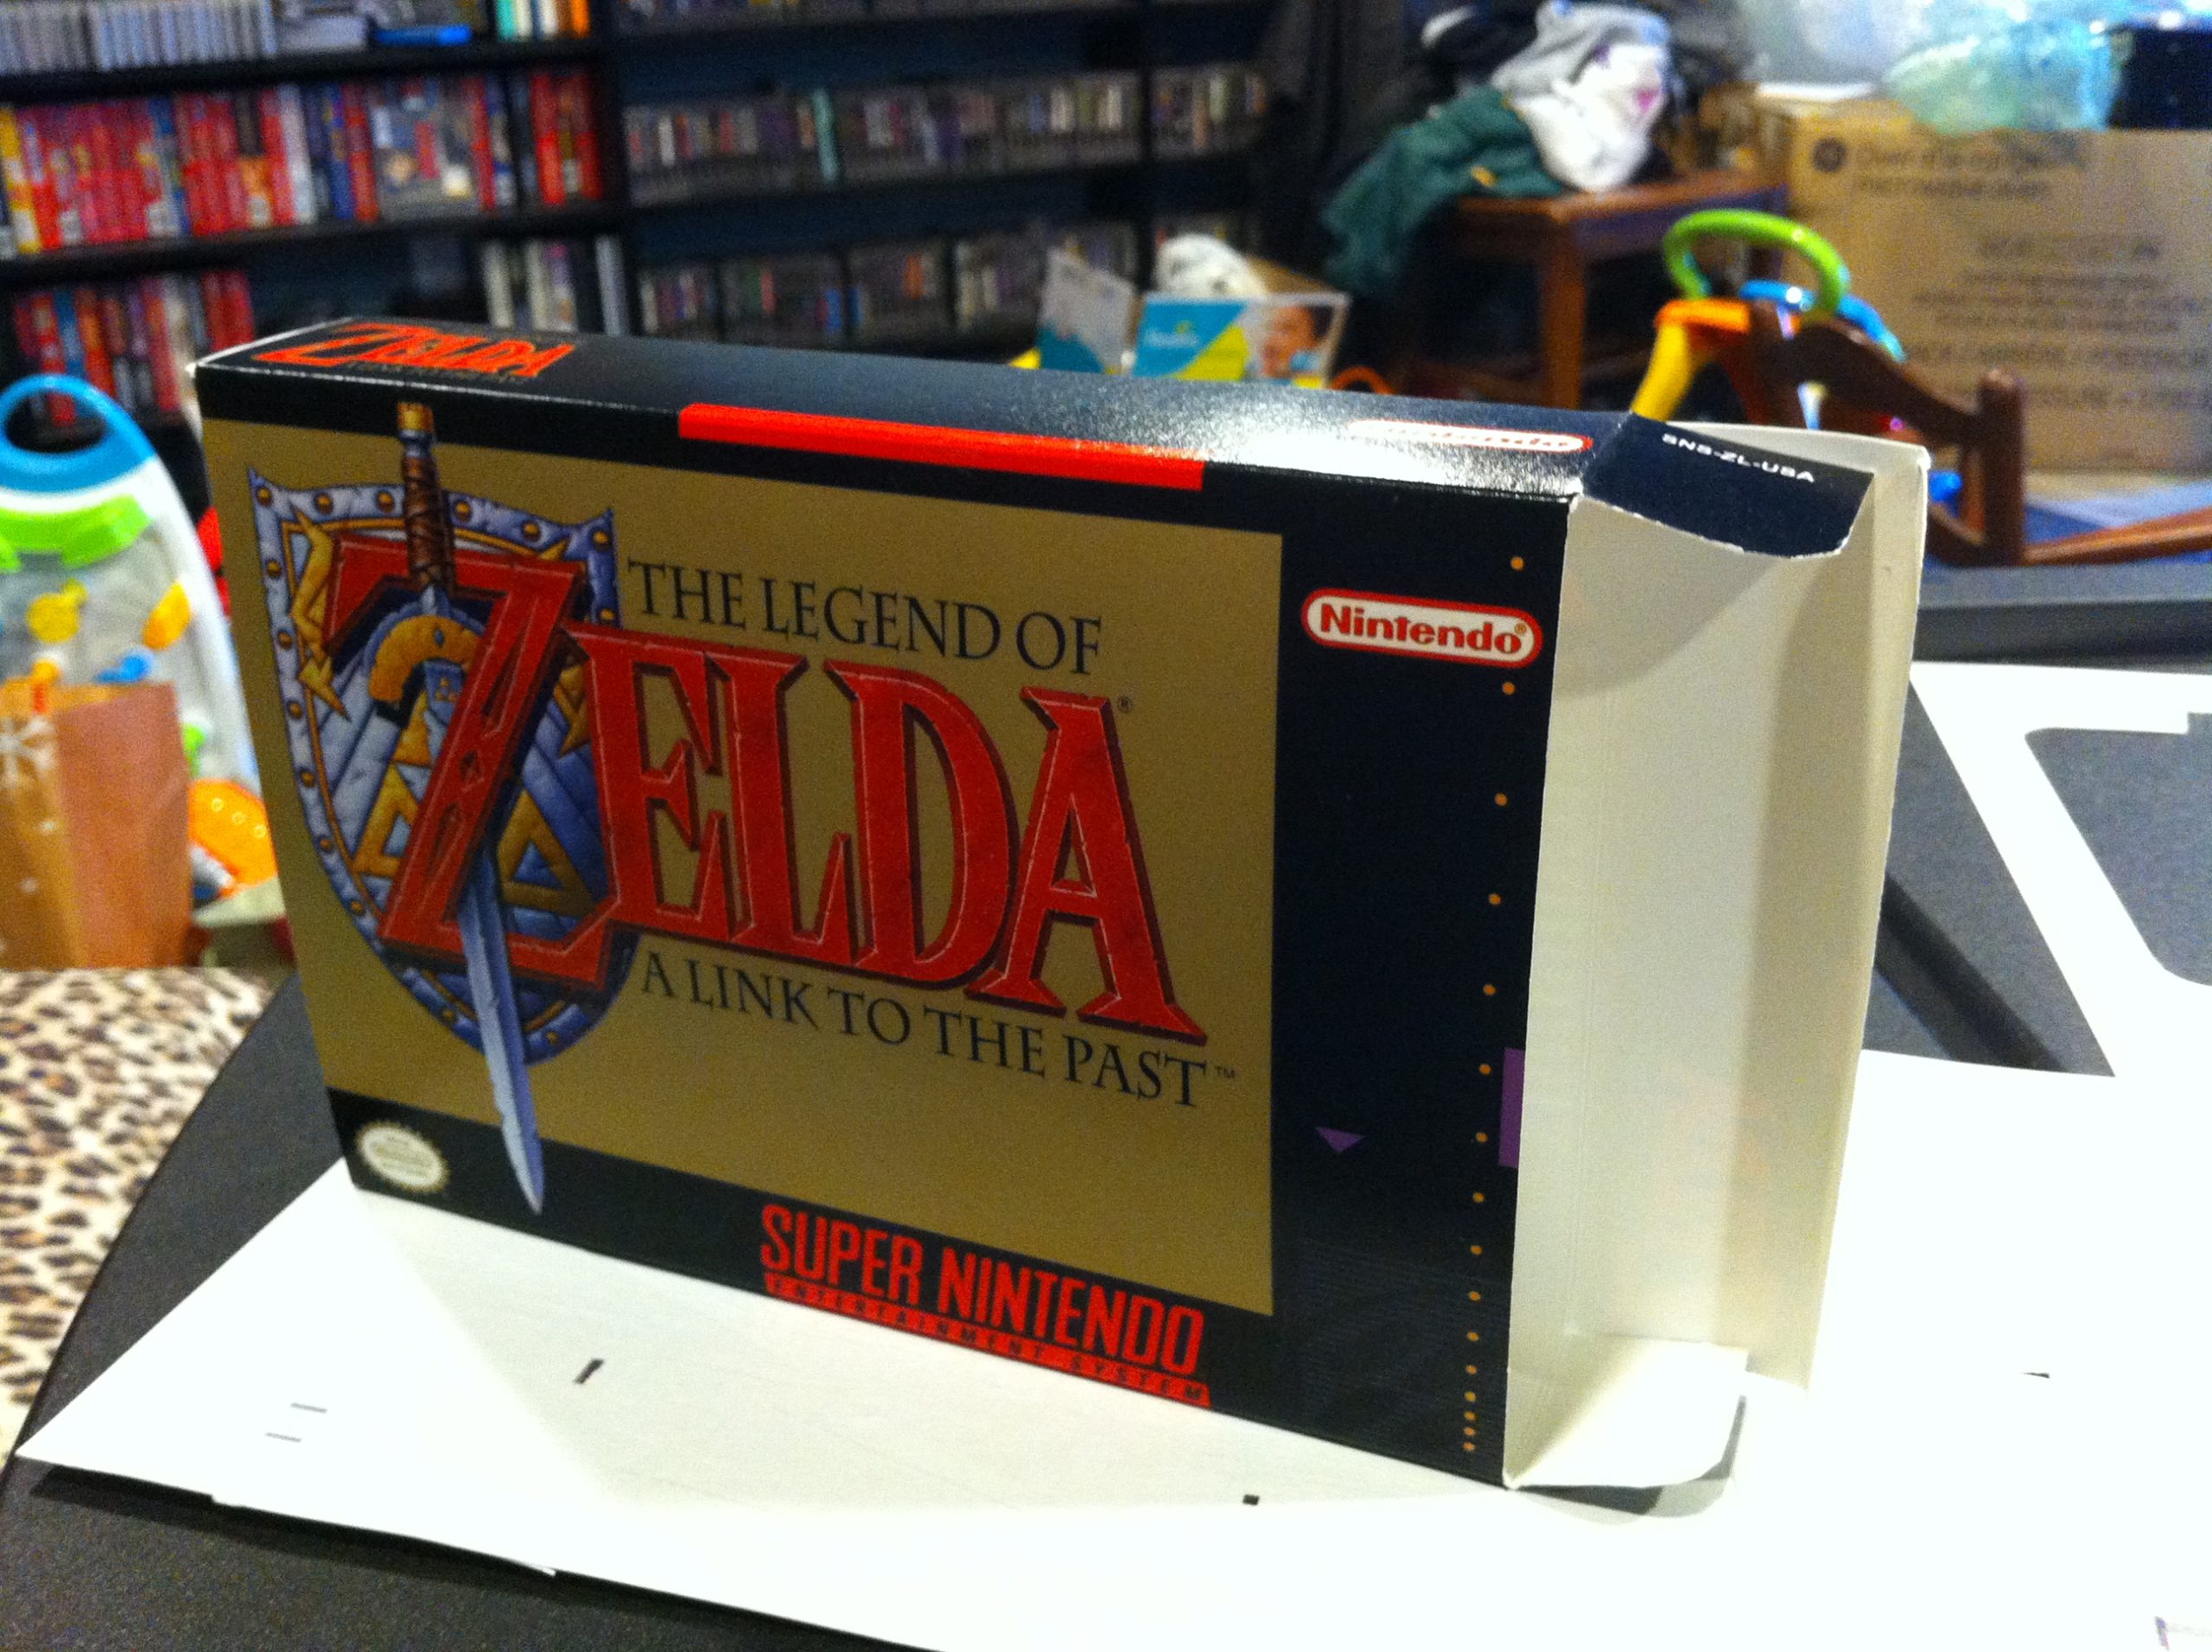 Legend of Zelda: A Link To The Past